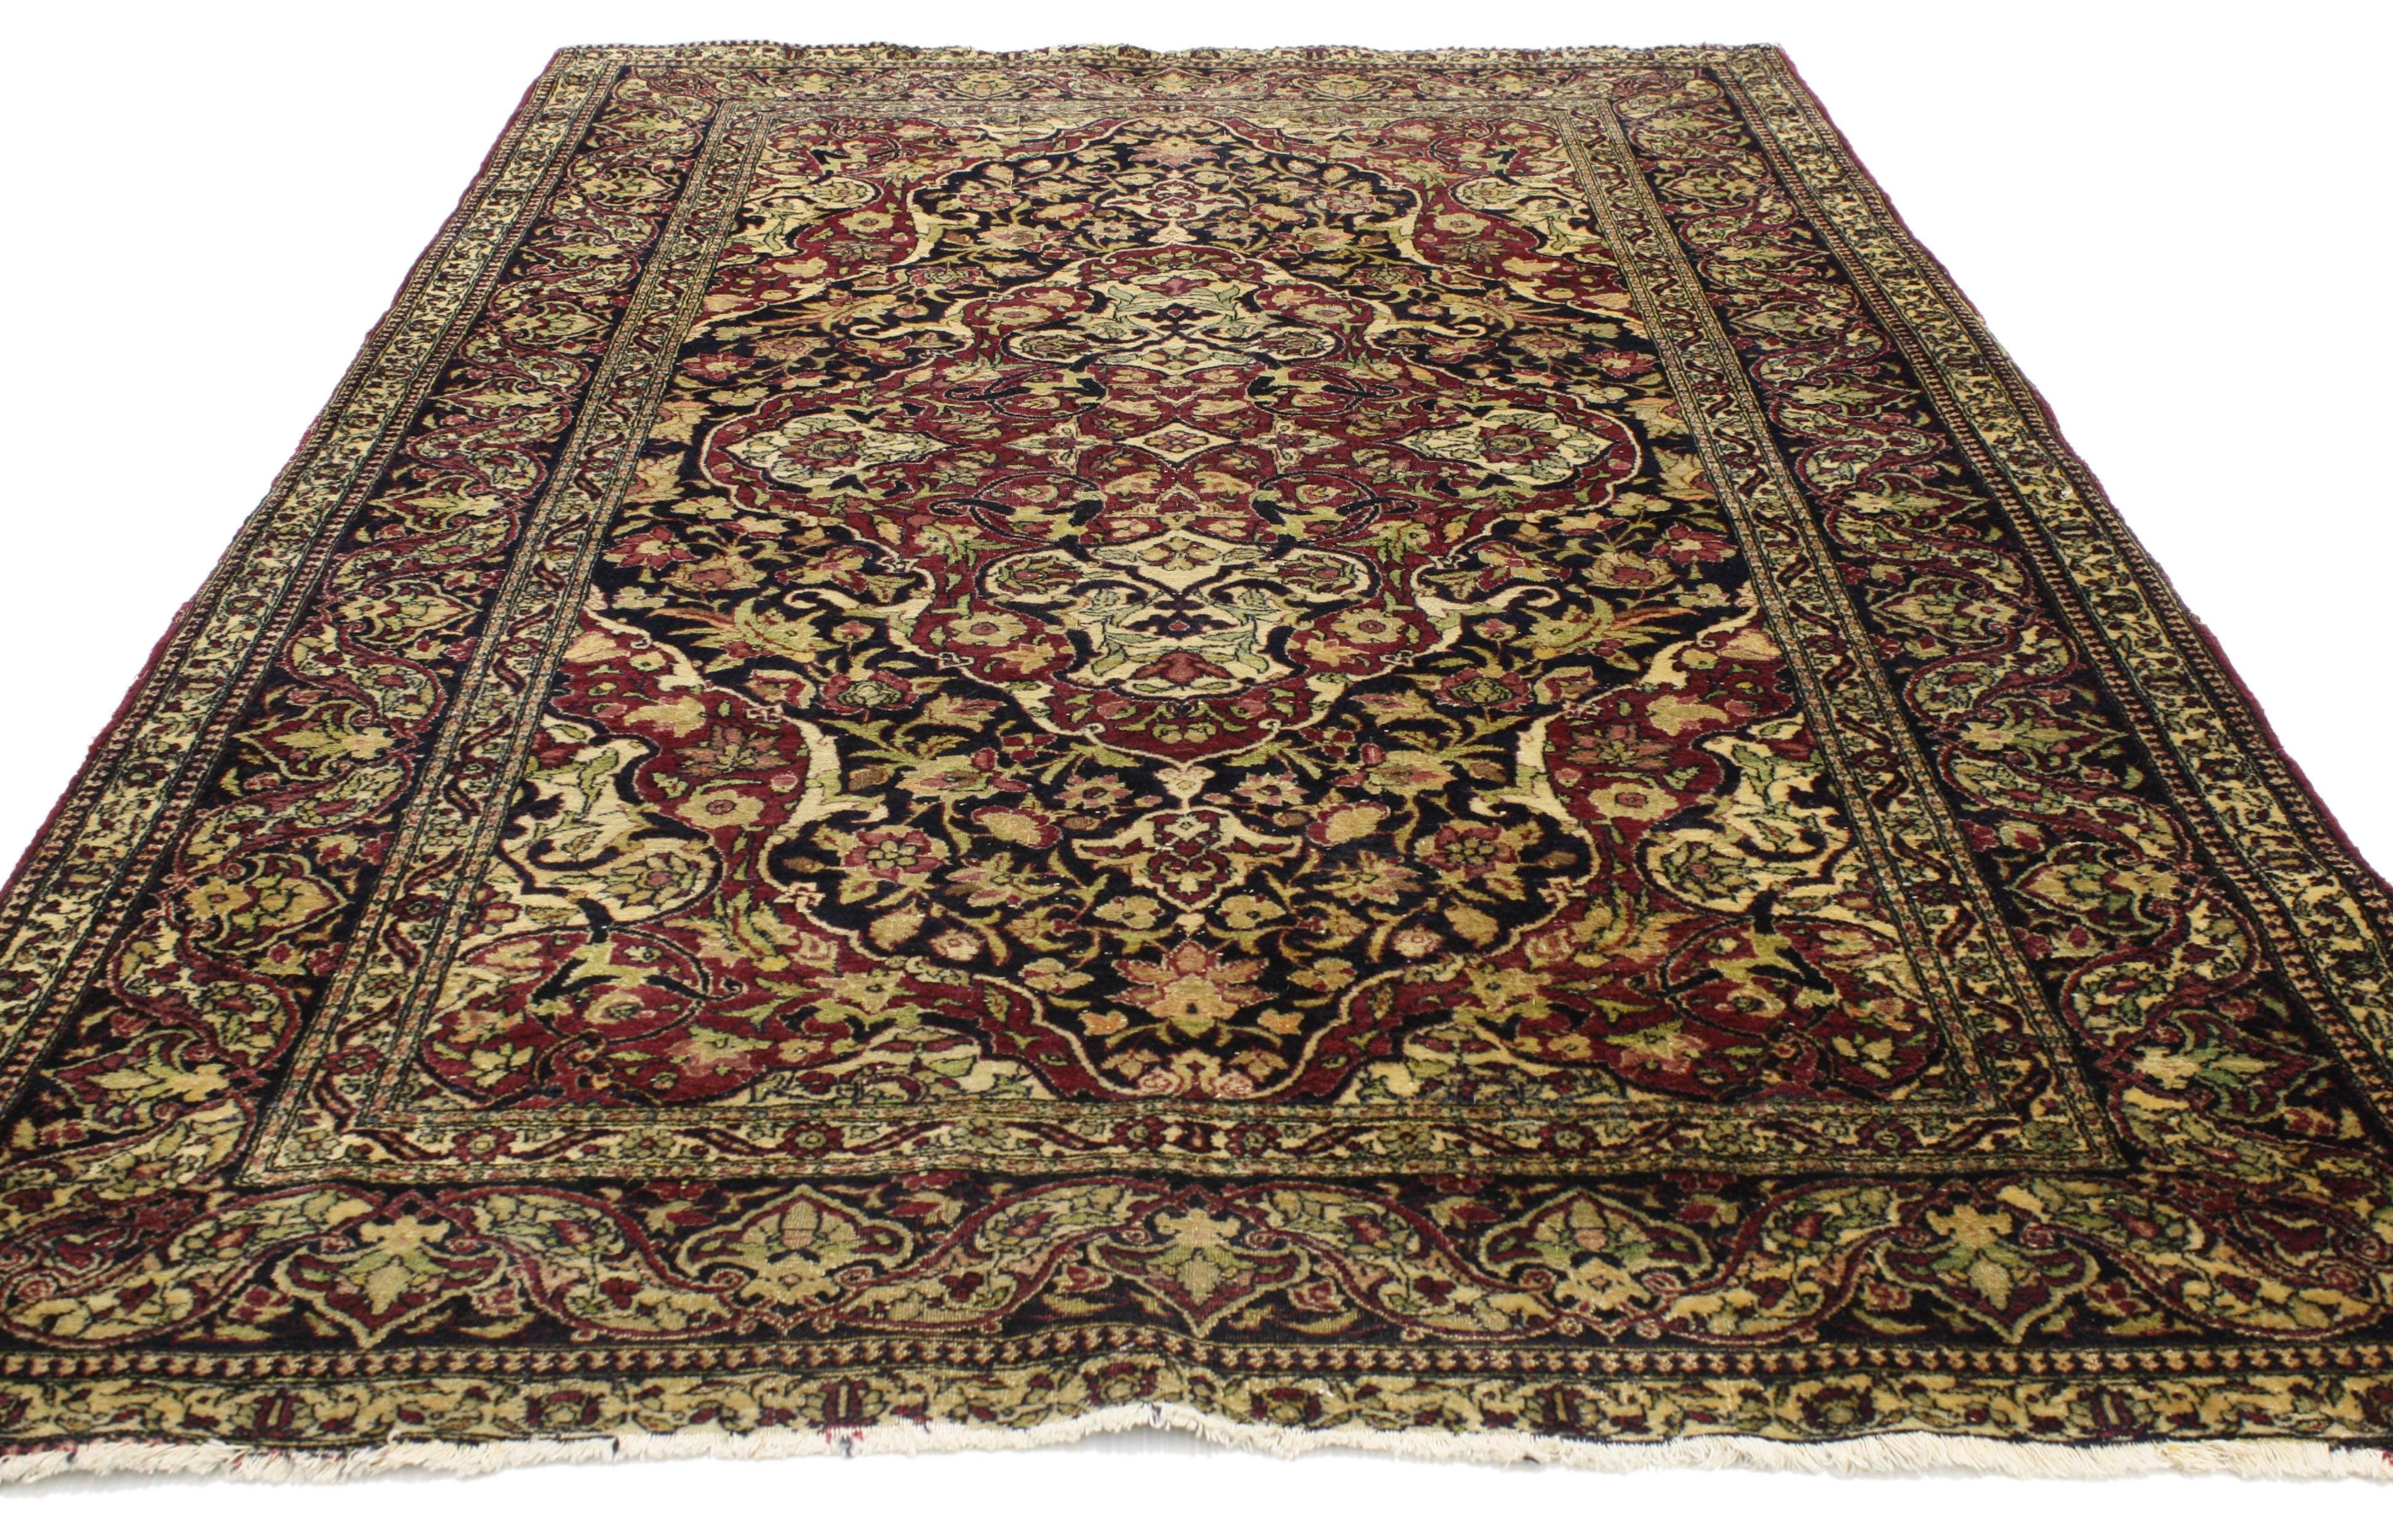 From casual elegance to fresh and formal, relish the refinement as this antique Persian Kerman rug with traditional style creates a timeless design. Its dark colors evoke an air of warmth and comfort with a classic design aesthetic. A grand